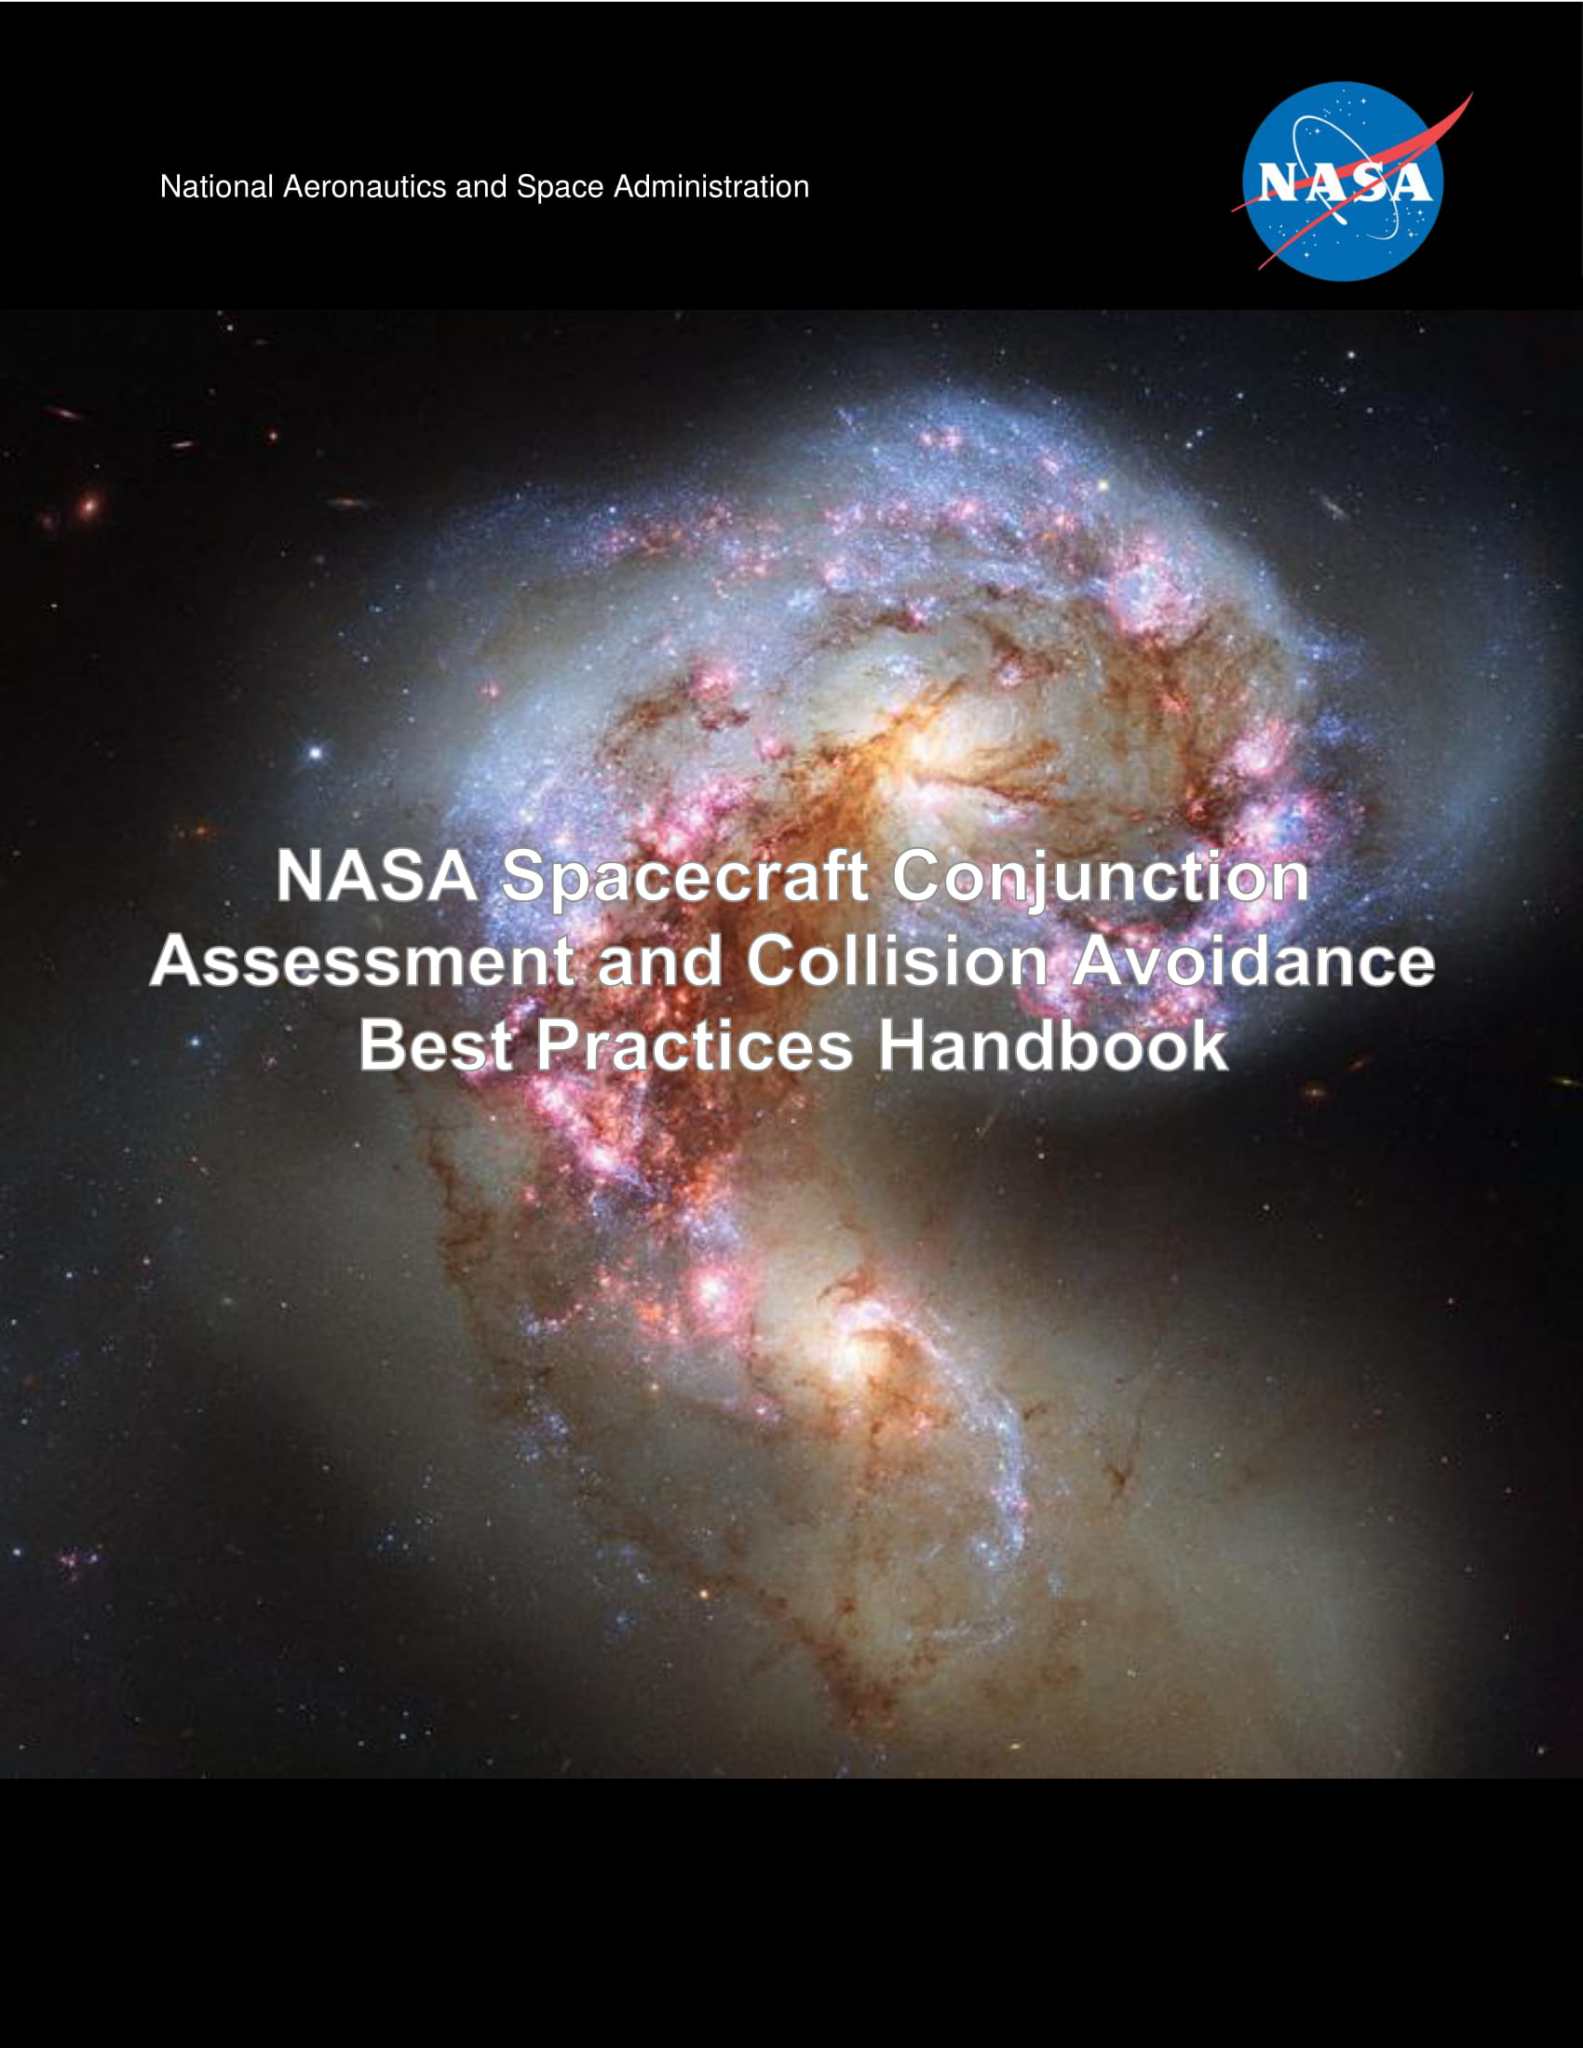 Cover of the NASA Spacecraft Conjunction Assessment and Collision Avoidance Best Practices Handbook